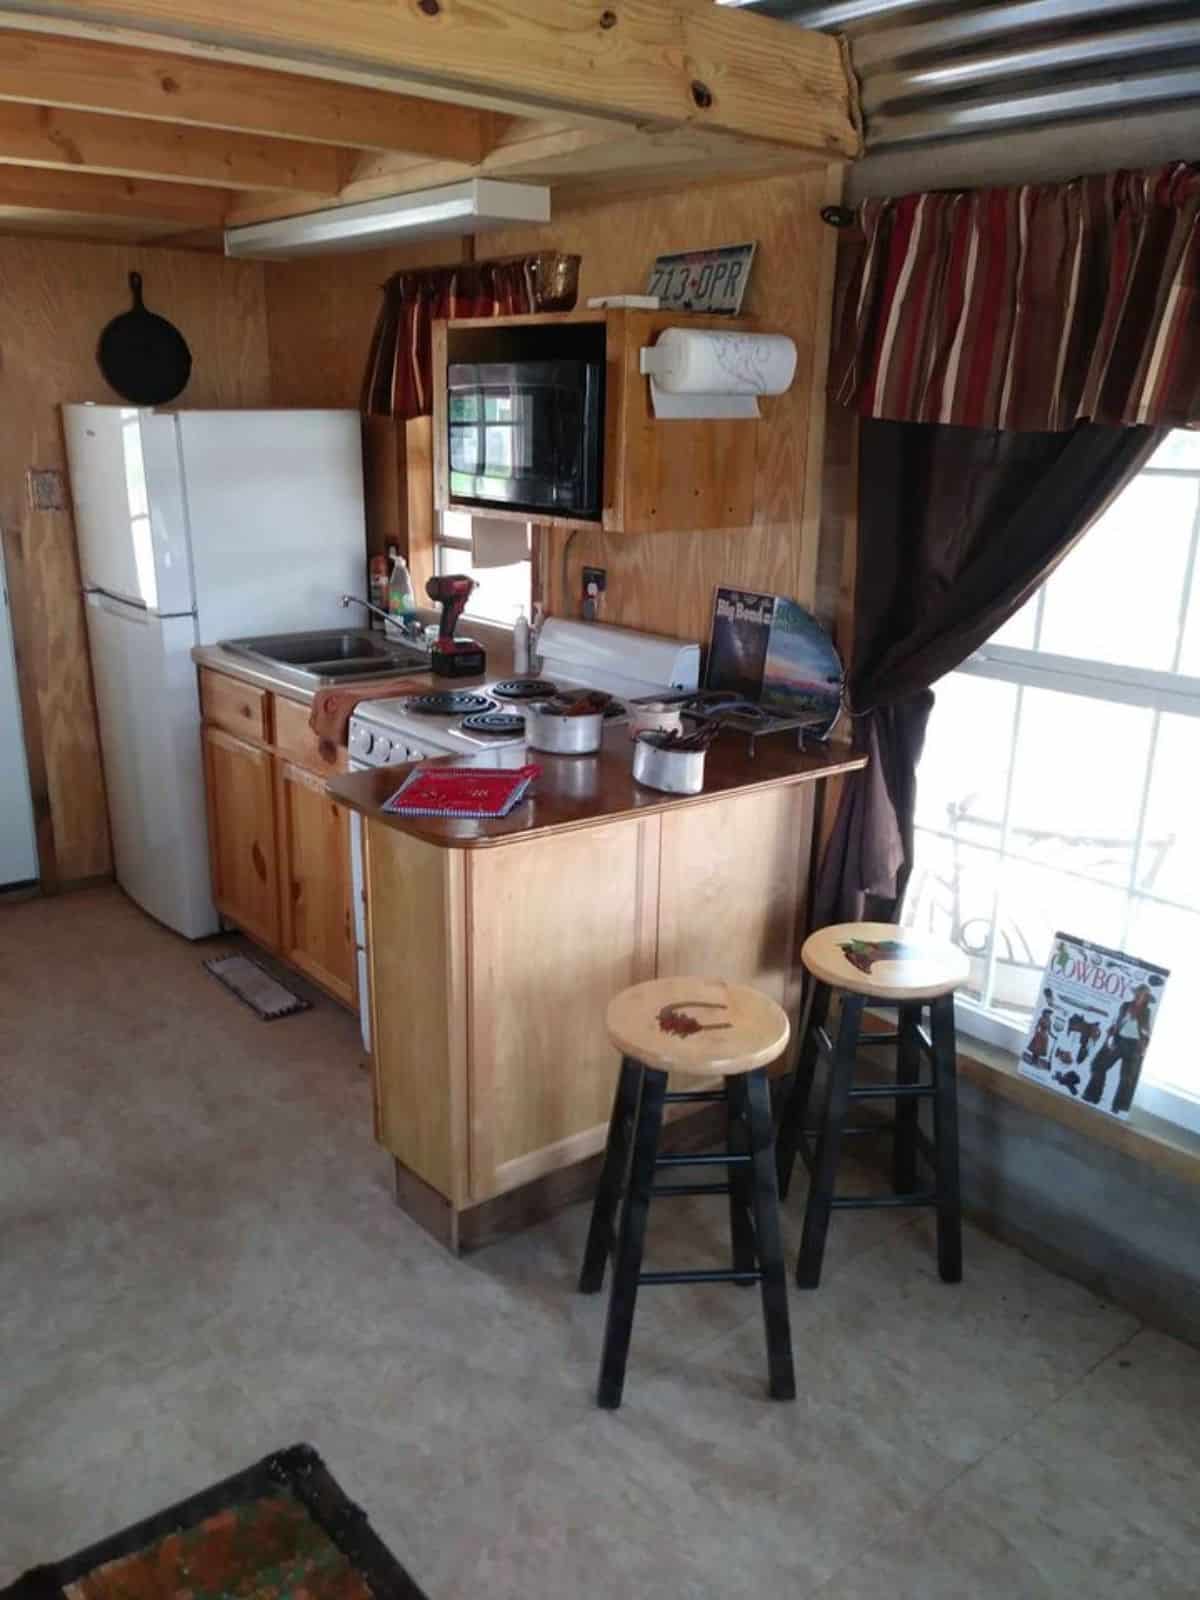 L shaped kitchen area of well insulated tiny house